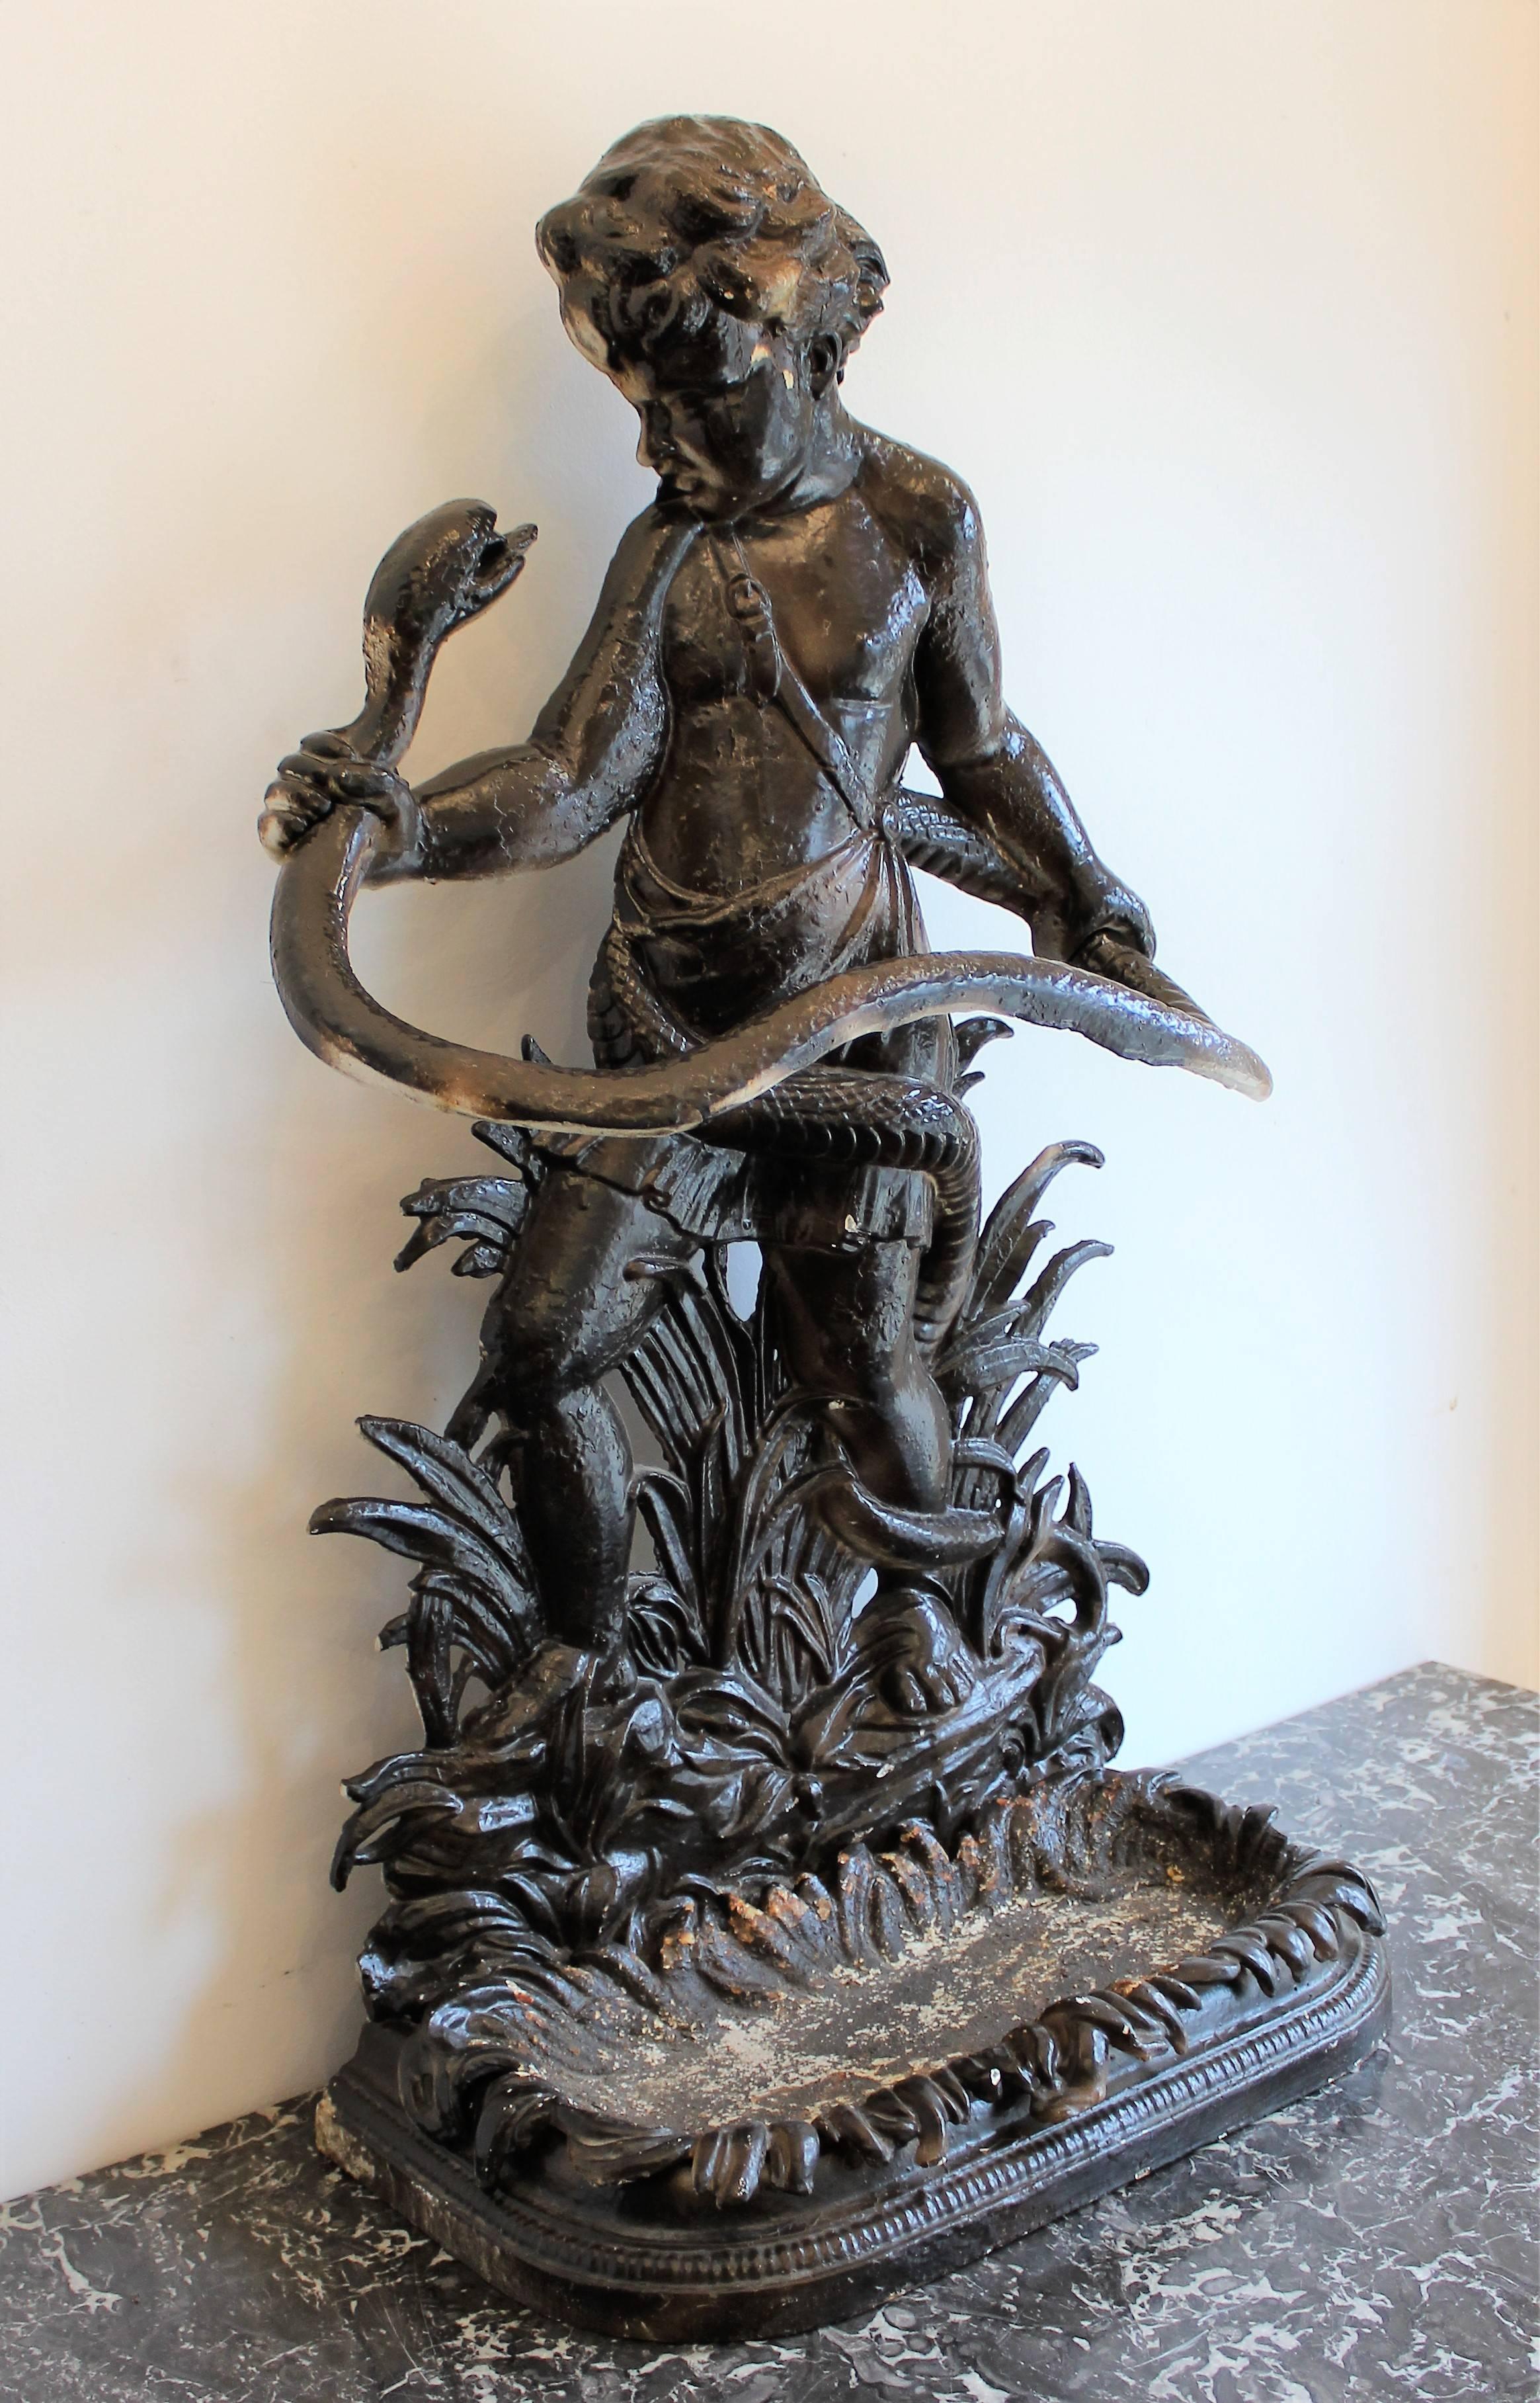 19th century English cast iron painted umbrella stand by Sheffield, Edwin & Theophilus Smith depicting the baby Hercules wrestling with the snake that the jealous Hera sent to destroy the child.